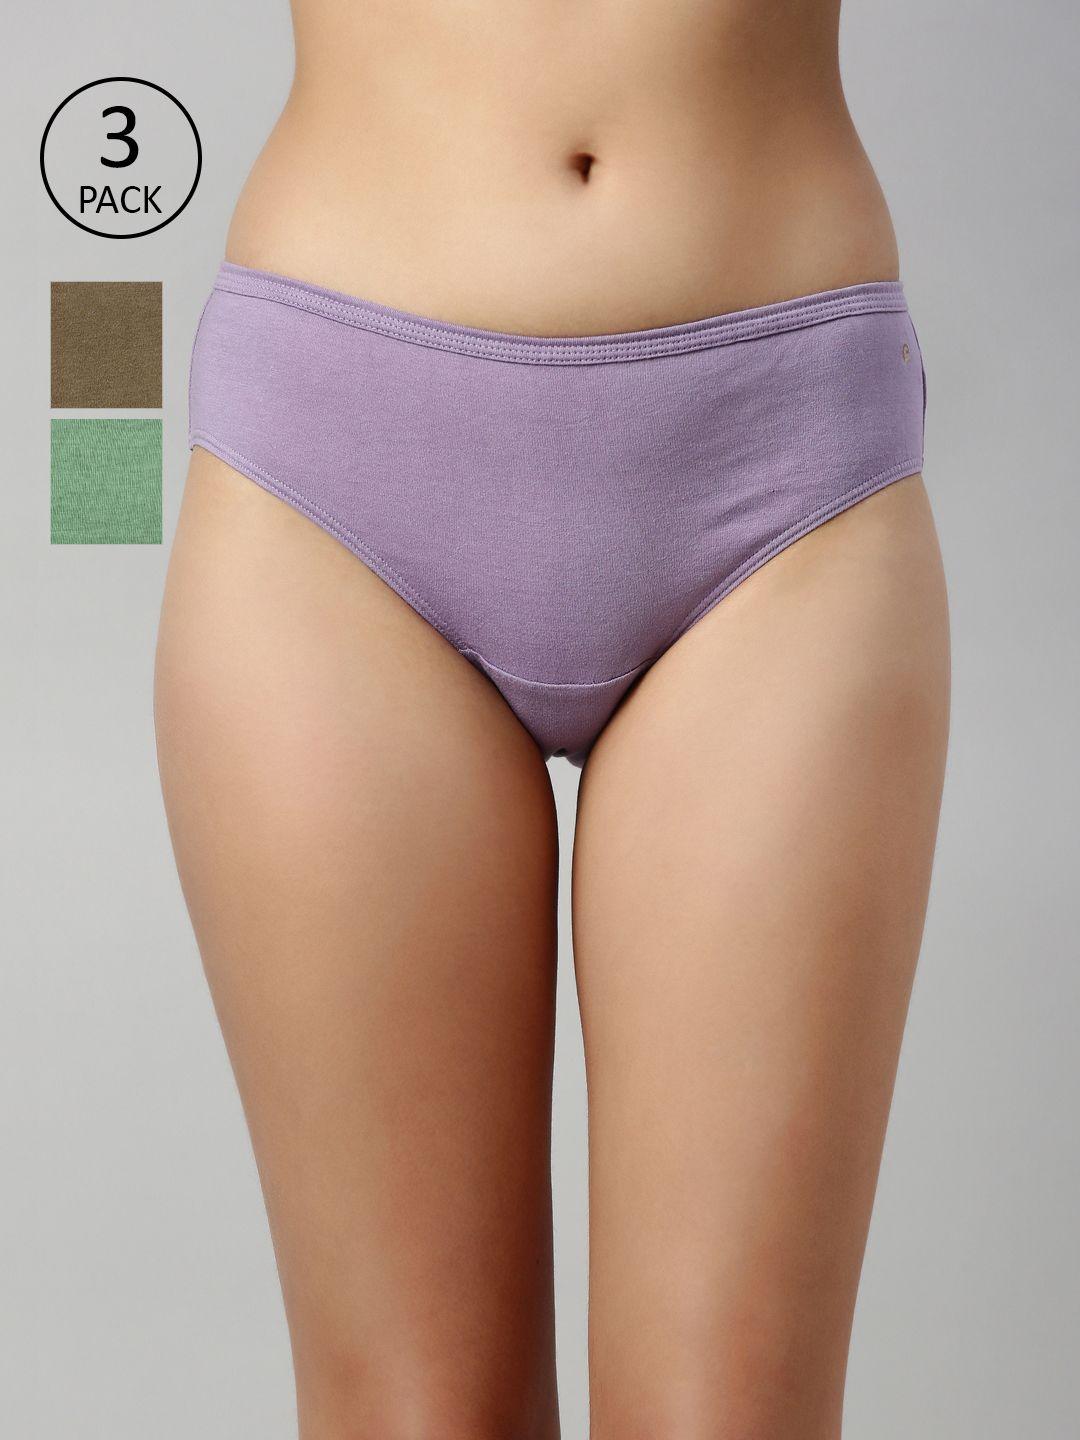 enamor women pack of 3 solid cotton antimicrobial hipster briefs-ch03